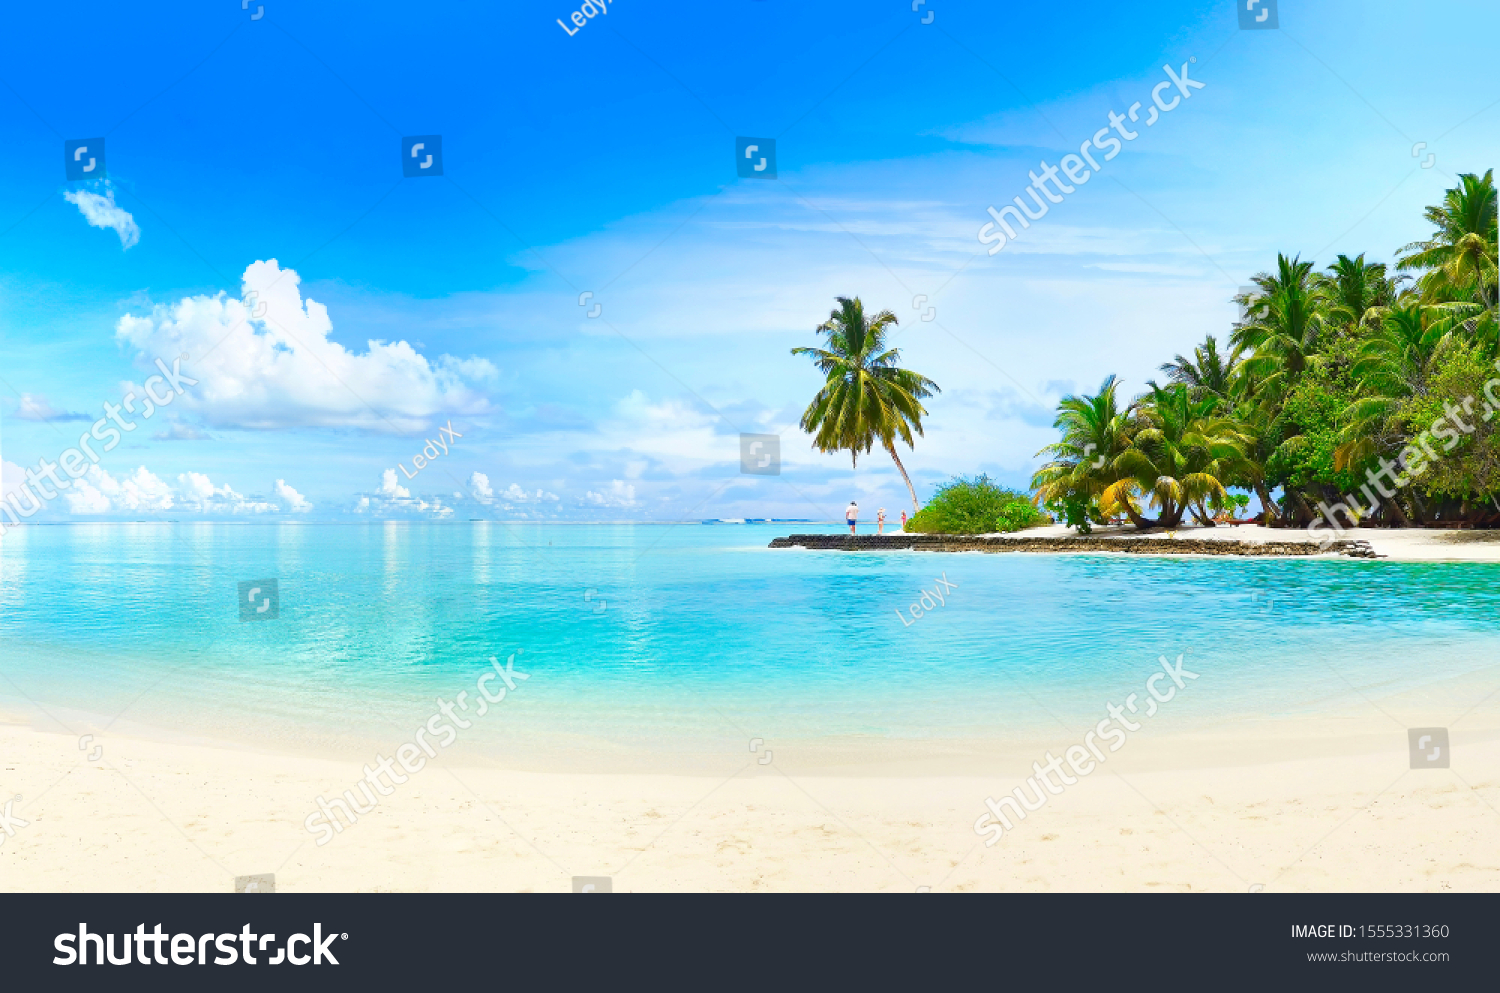 Beautiful beach with white sand, turquoise ocean, green palm trees and blue sky with clouds on Sunny day. Summer tropical landscape, panoramic view.